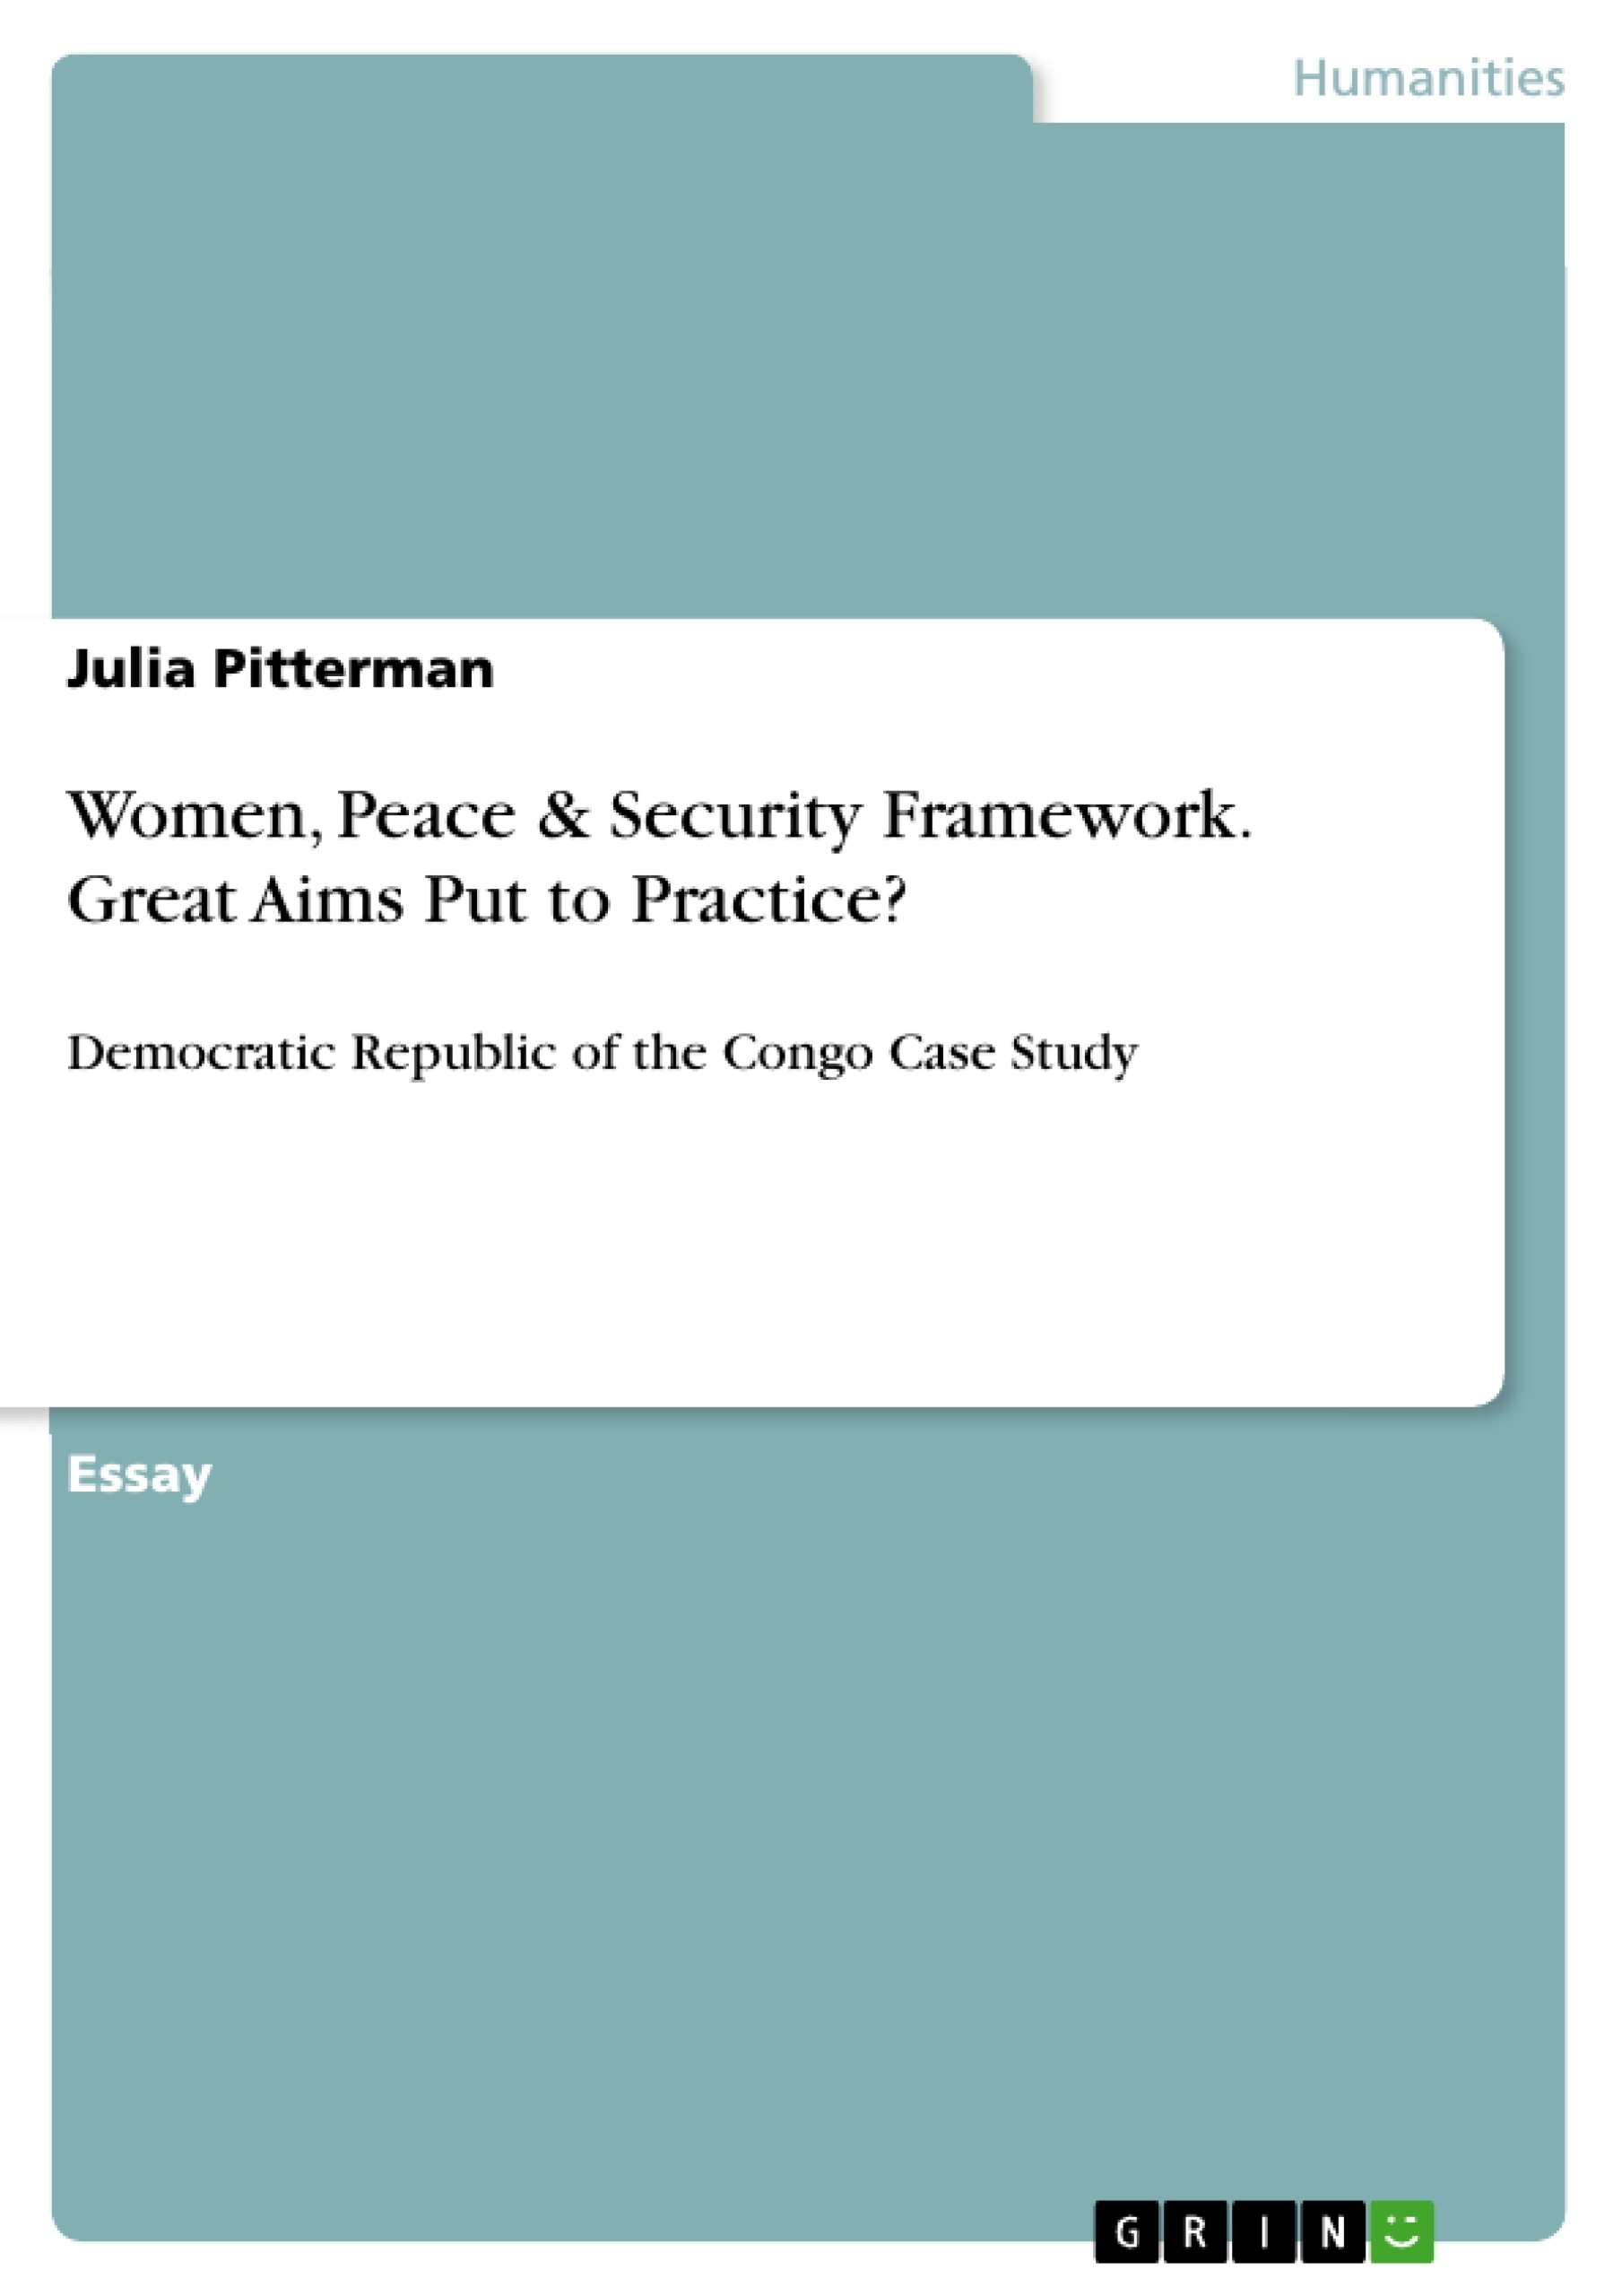 Title: Women, Peace & Security Framework. Great Aims Put to Practice?